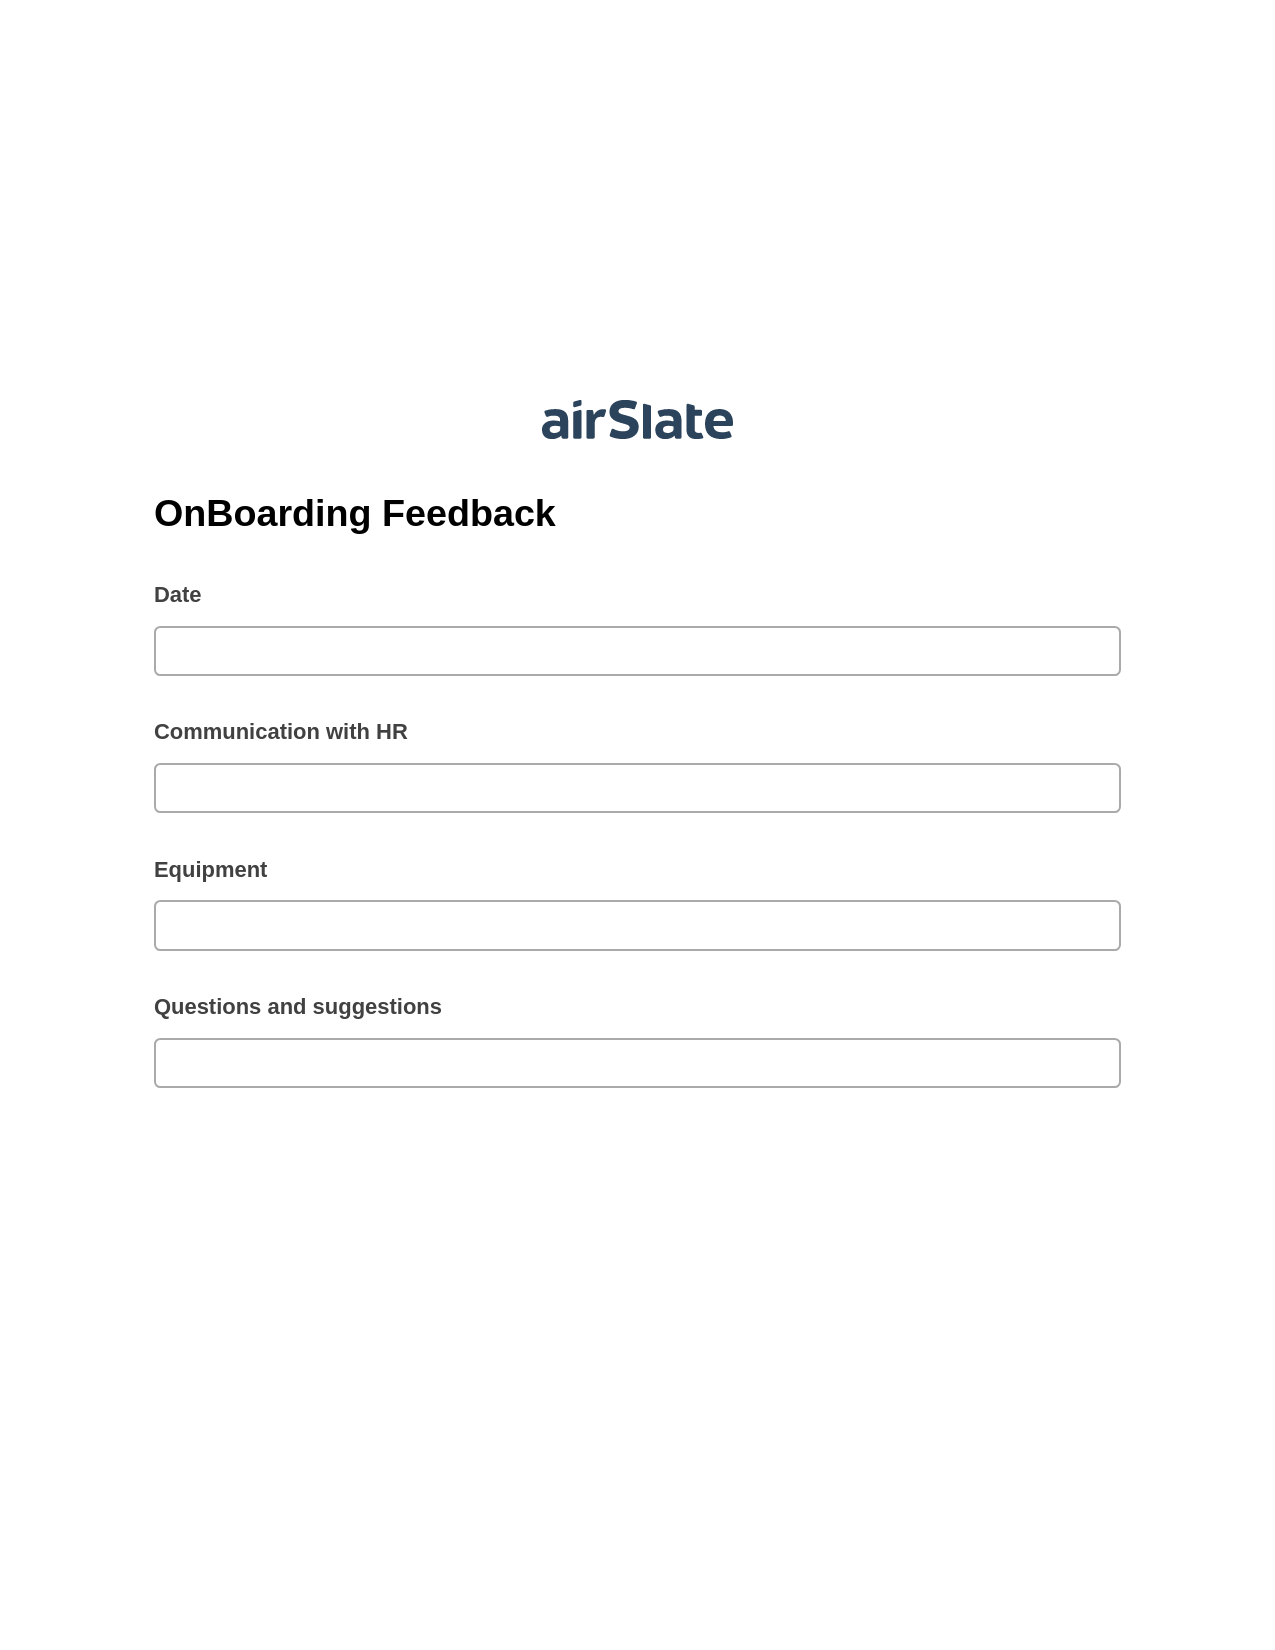 OnBoarding Feedback Pre-fill from CSV File Bot, Unassign Role Bot, Export to Salesforce Bot